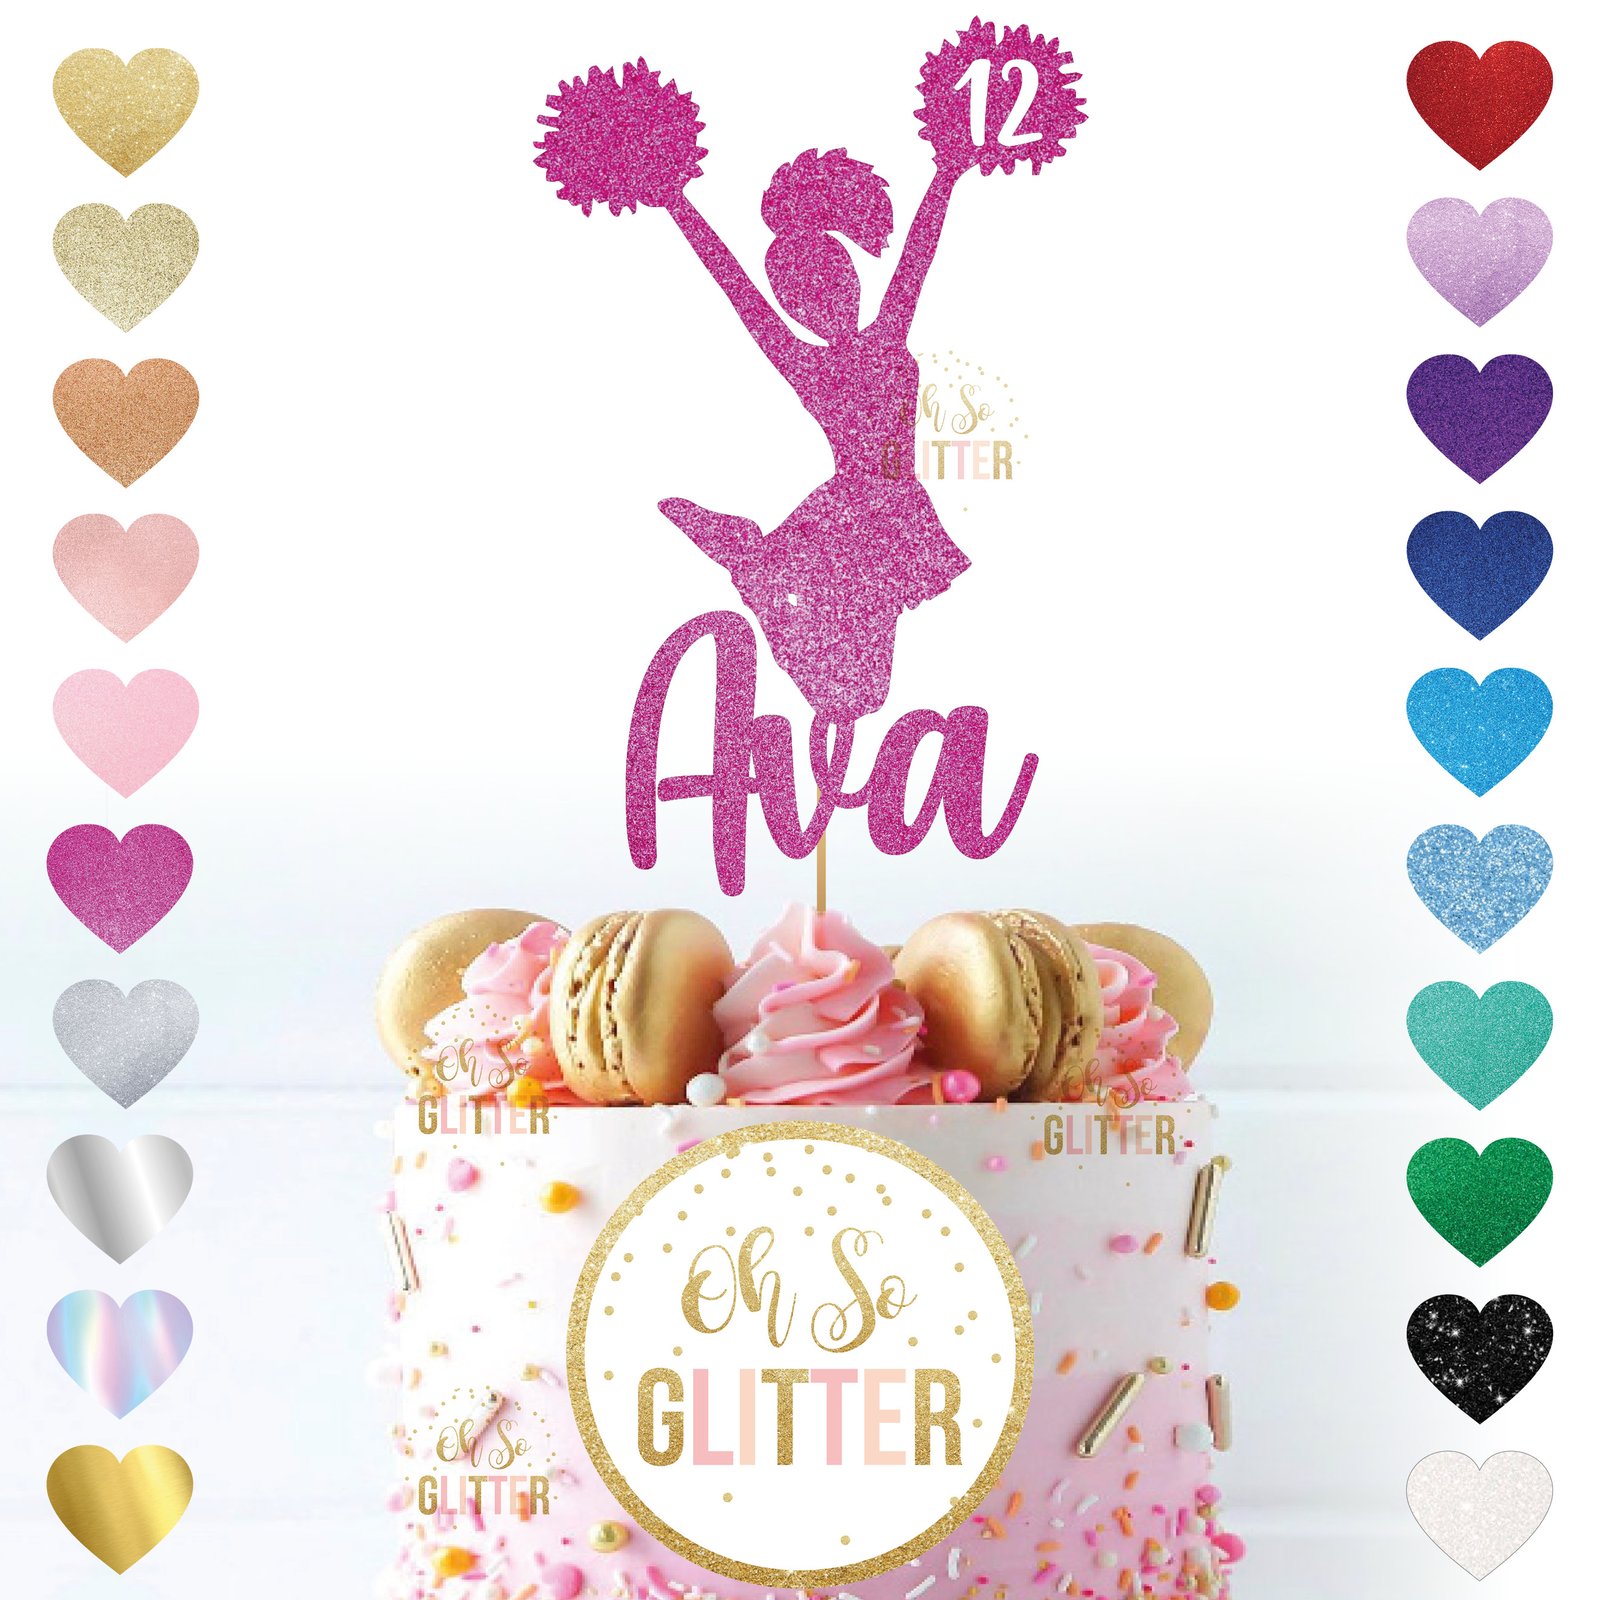 Ballerina Slippers Edible Cake Topper Image – A Birthday Place